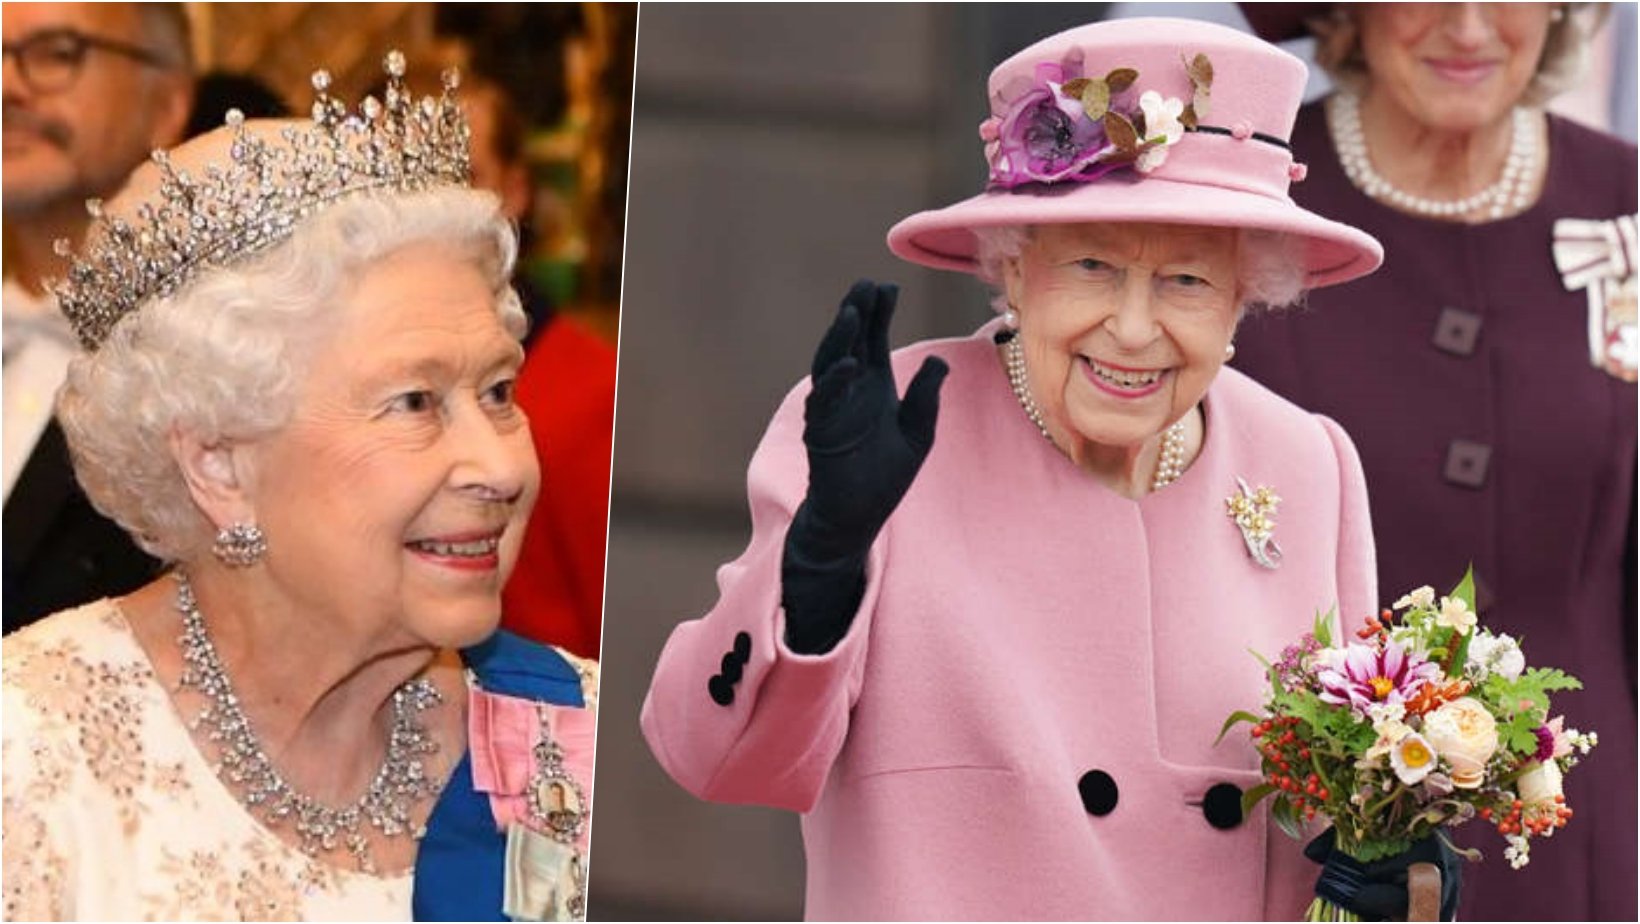 6 facebook cover 23.jpg?resize=1200,630 - Queen Elizabeth Politely Declines “Oldie Of The Year” Award Saying She Does Not Fit The Criteria